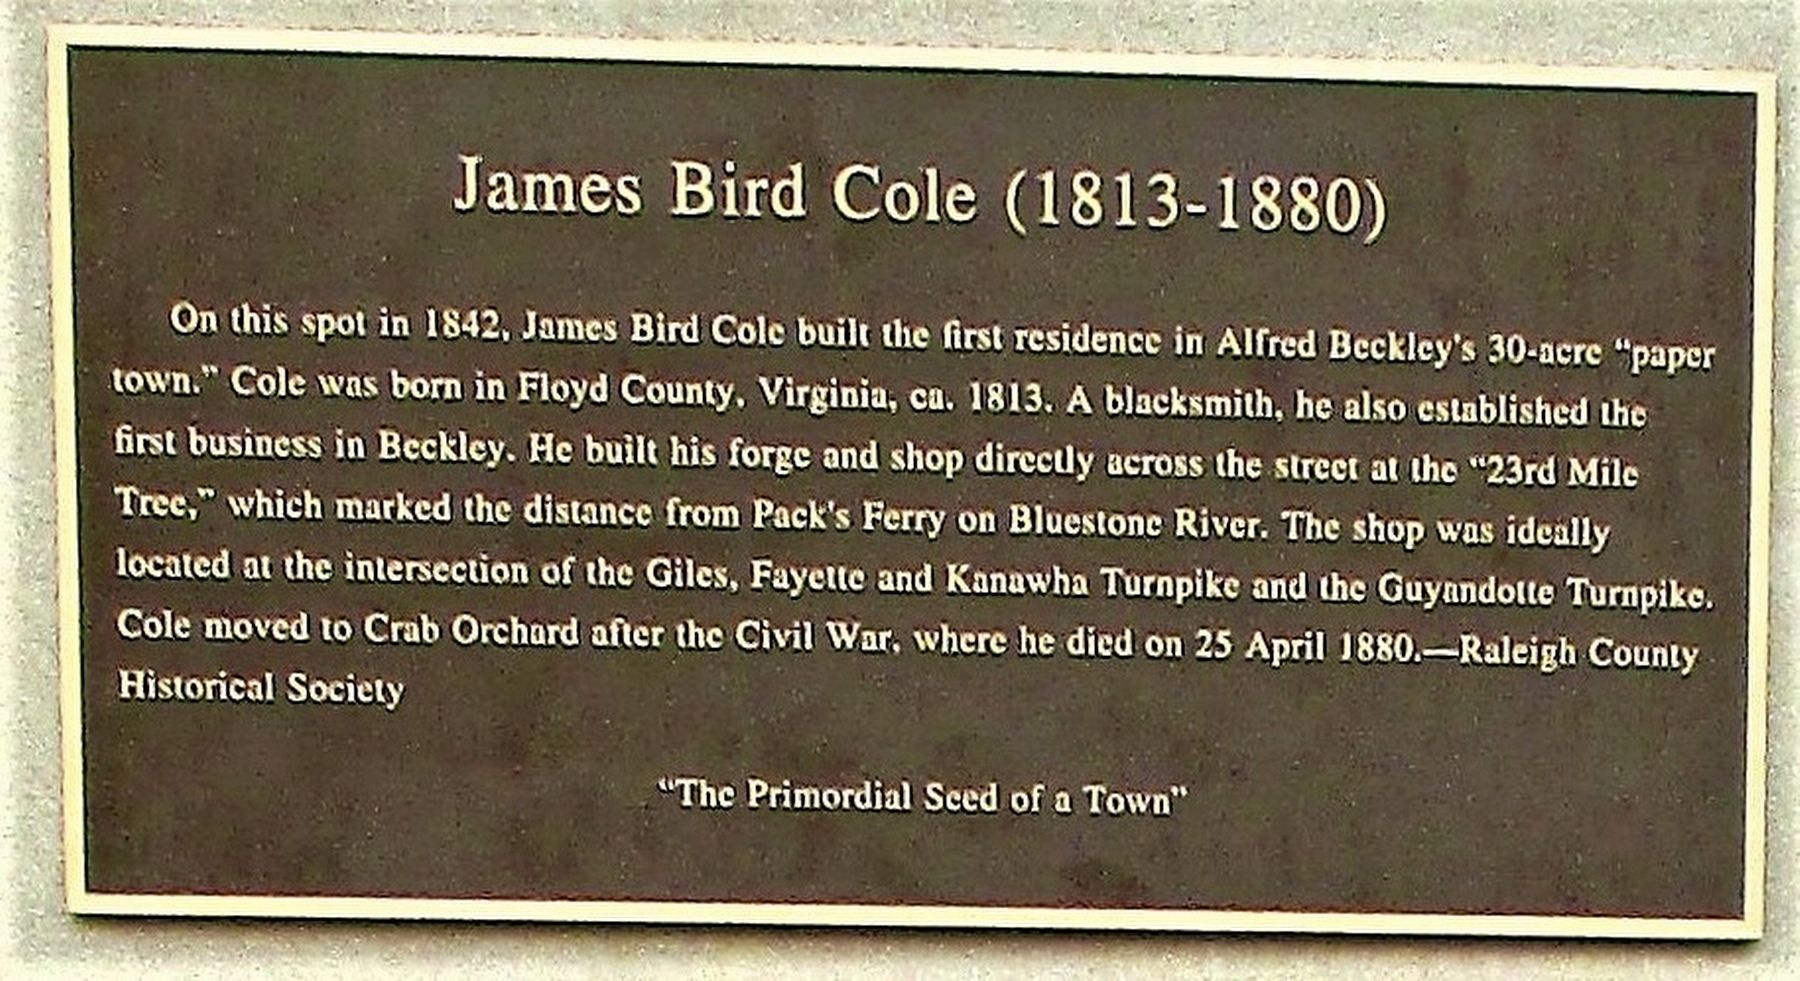 James Bird Cole (1813-1880) Marker image. Click for full size.